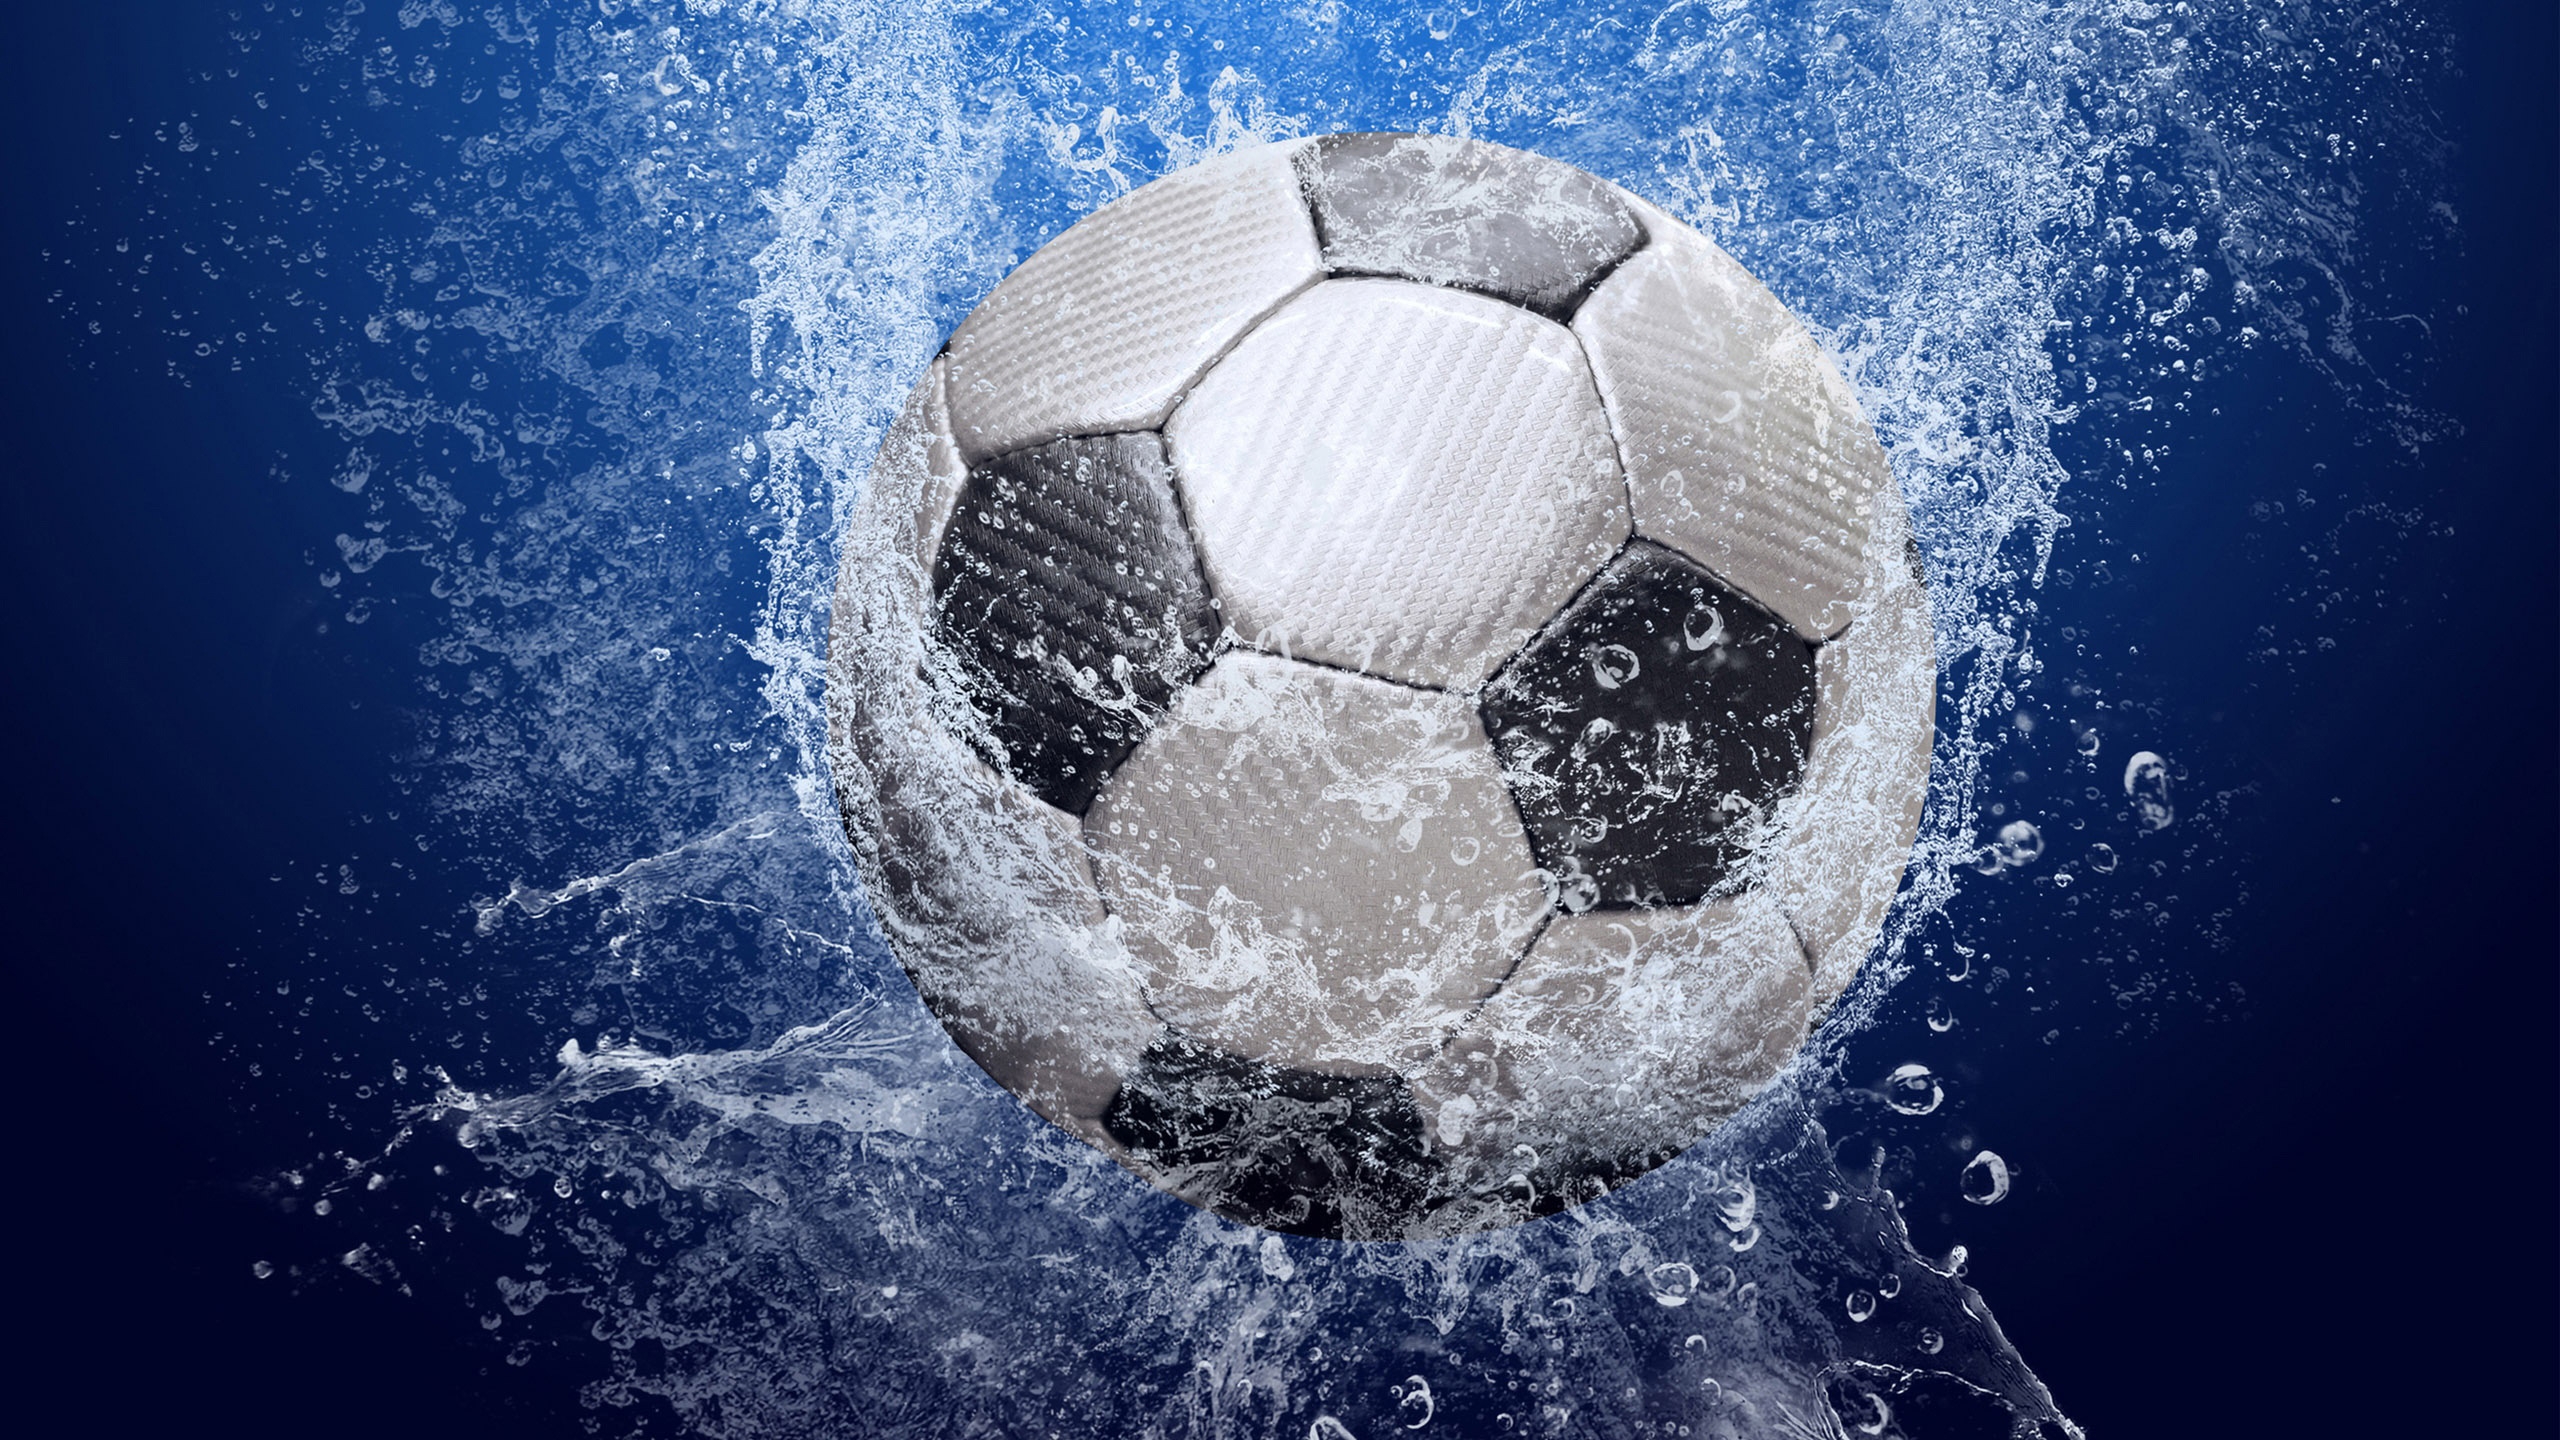 Ball in the Water 2560x1440 HDTV Wallpaper